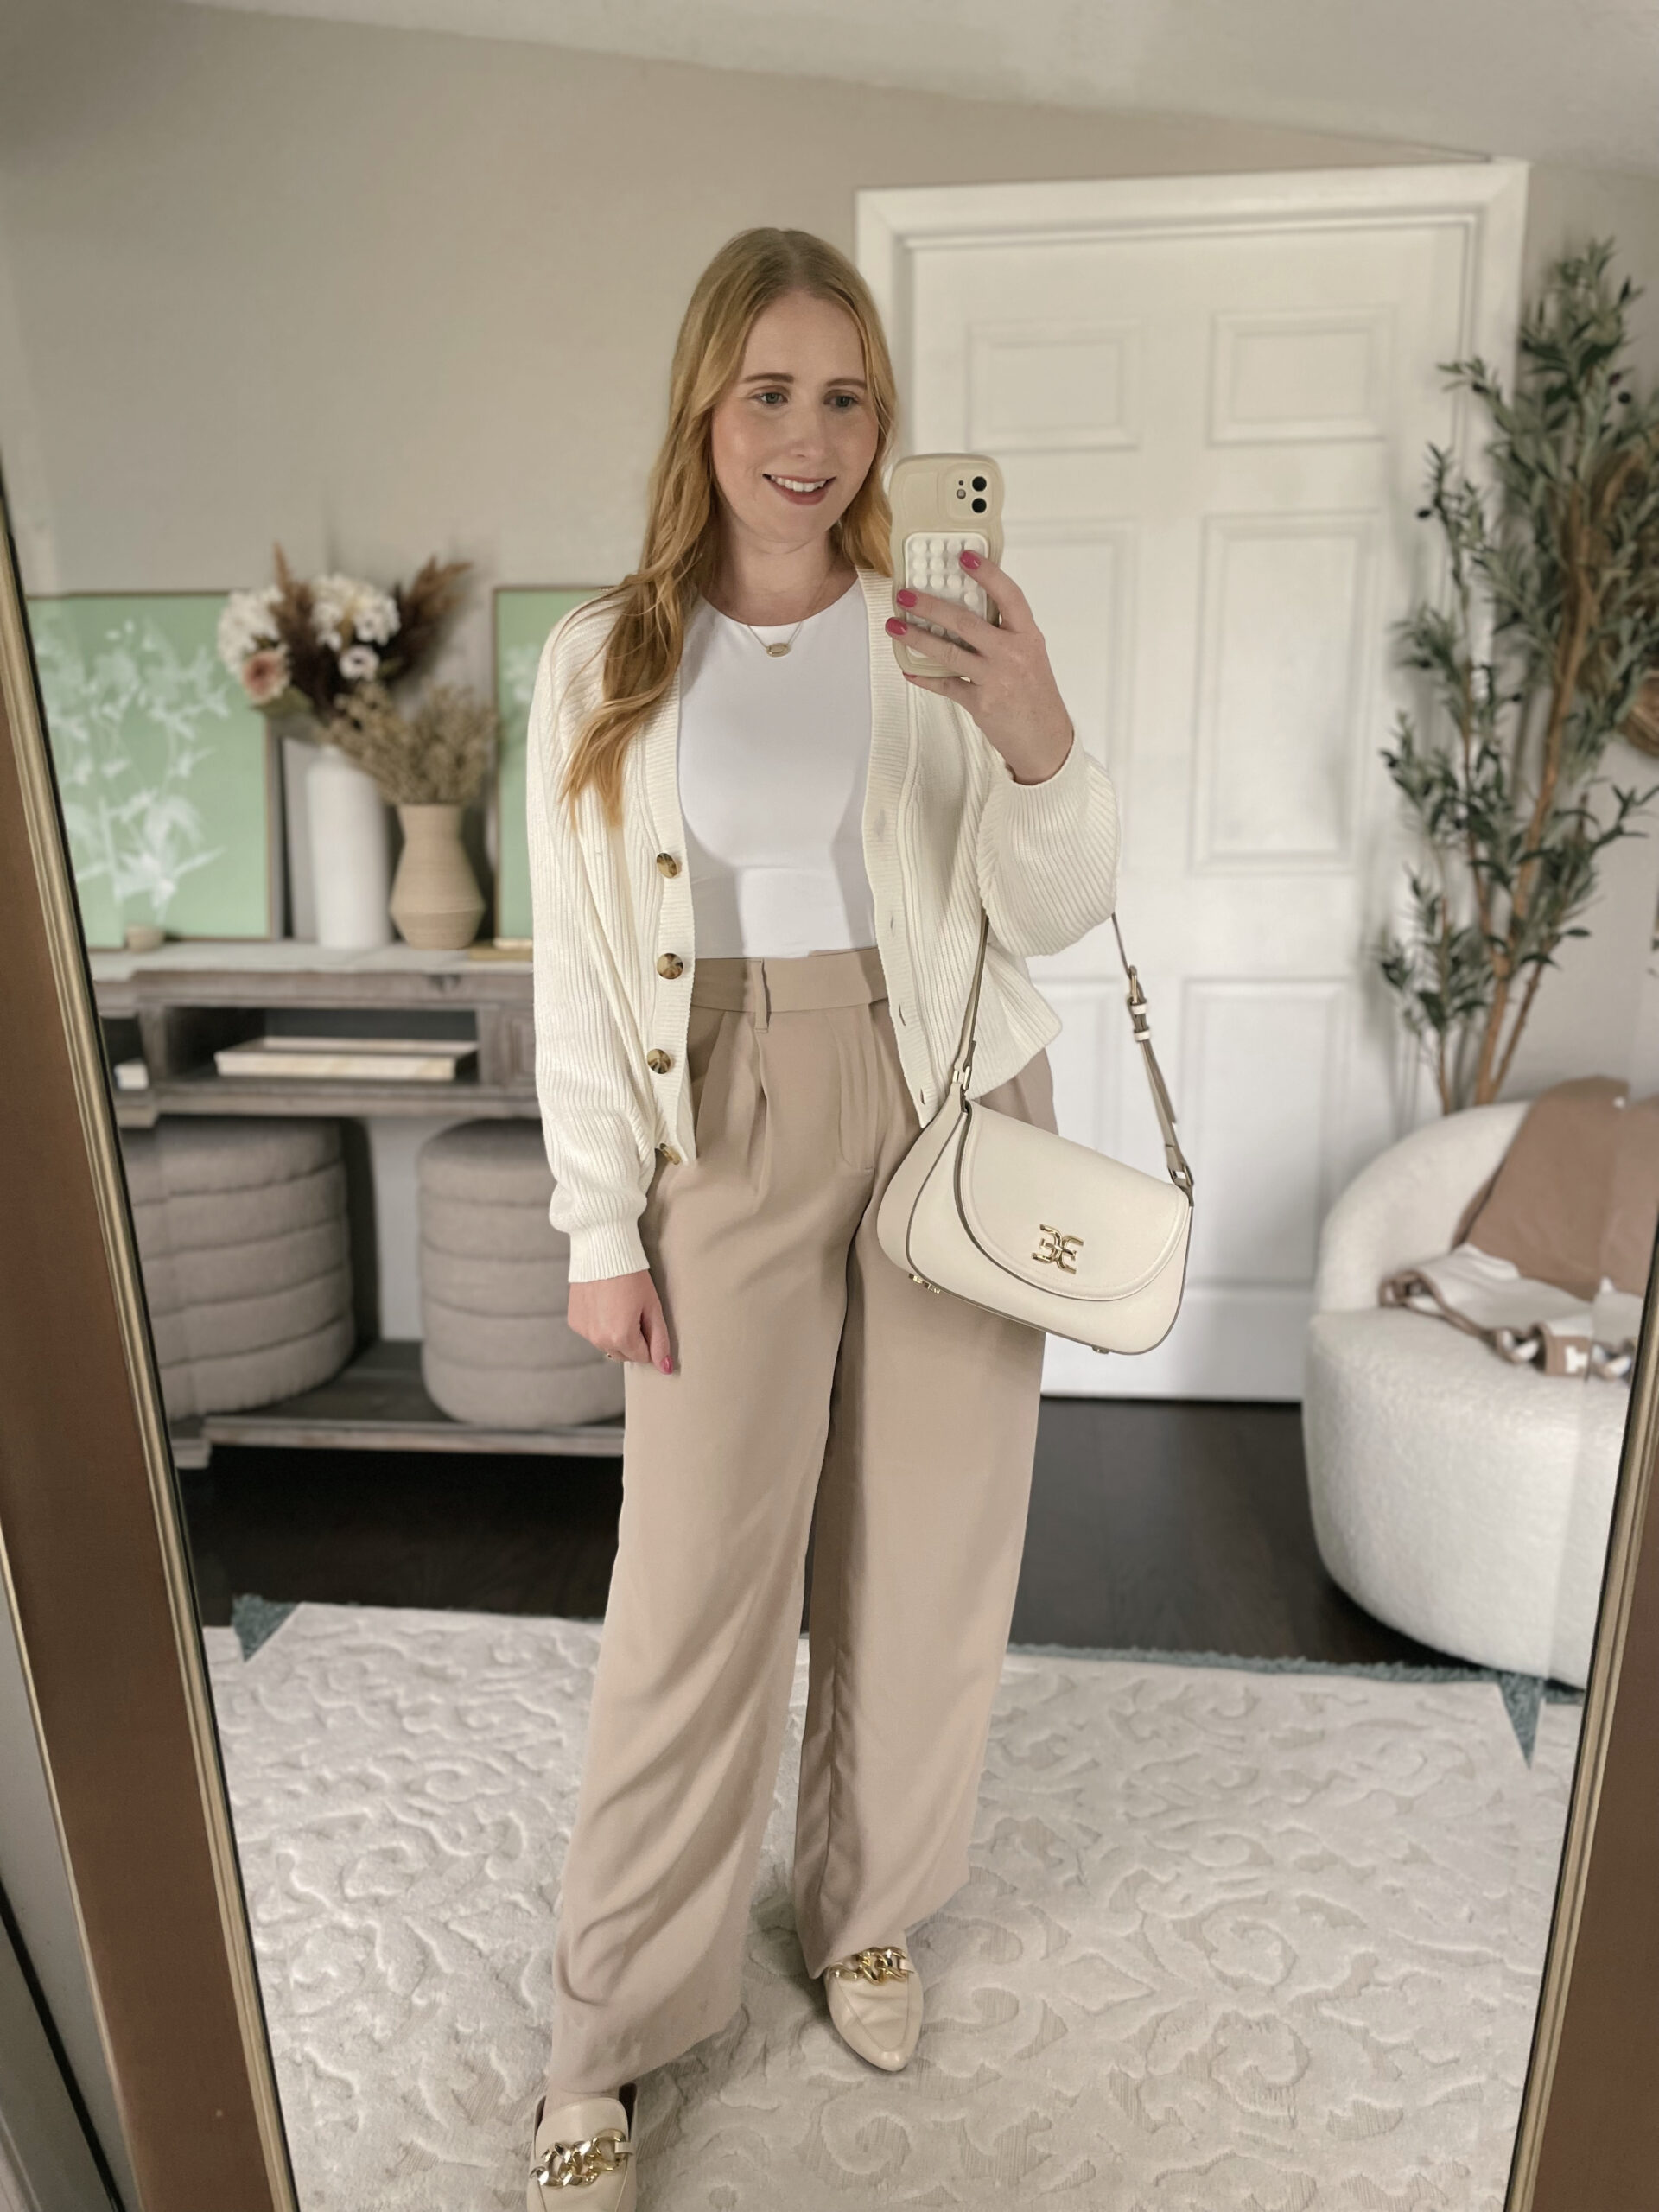 Teacher Outfit Idea 2023 - White ribbed cardigan, white bodysuit, neutral beige trousers